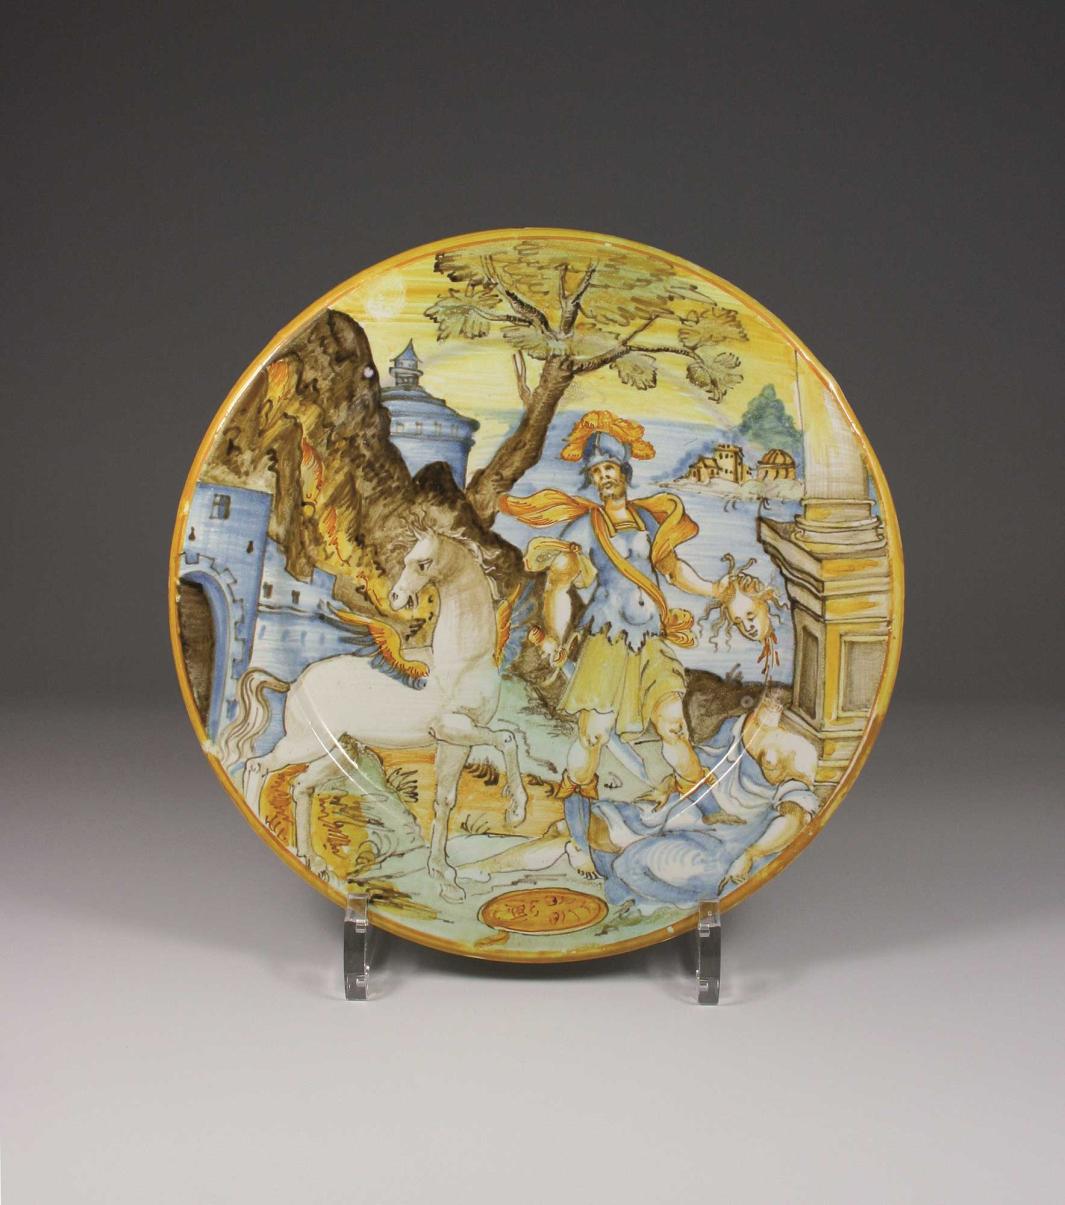 Earthenware plate with a scene of a winged horse and an armored figure holding the head of medusa while standing on her body.